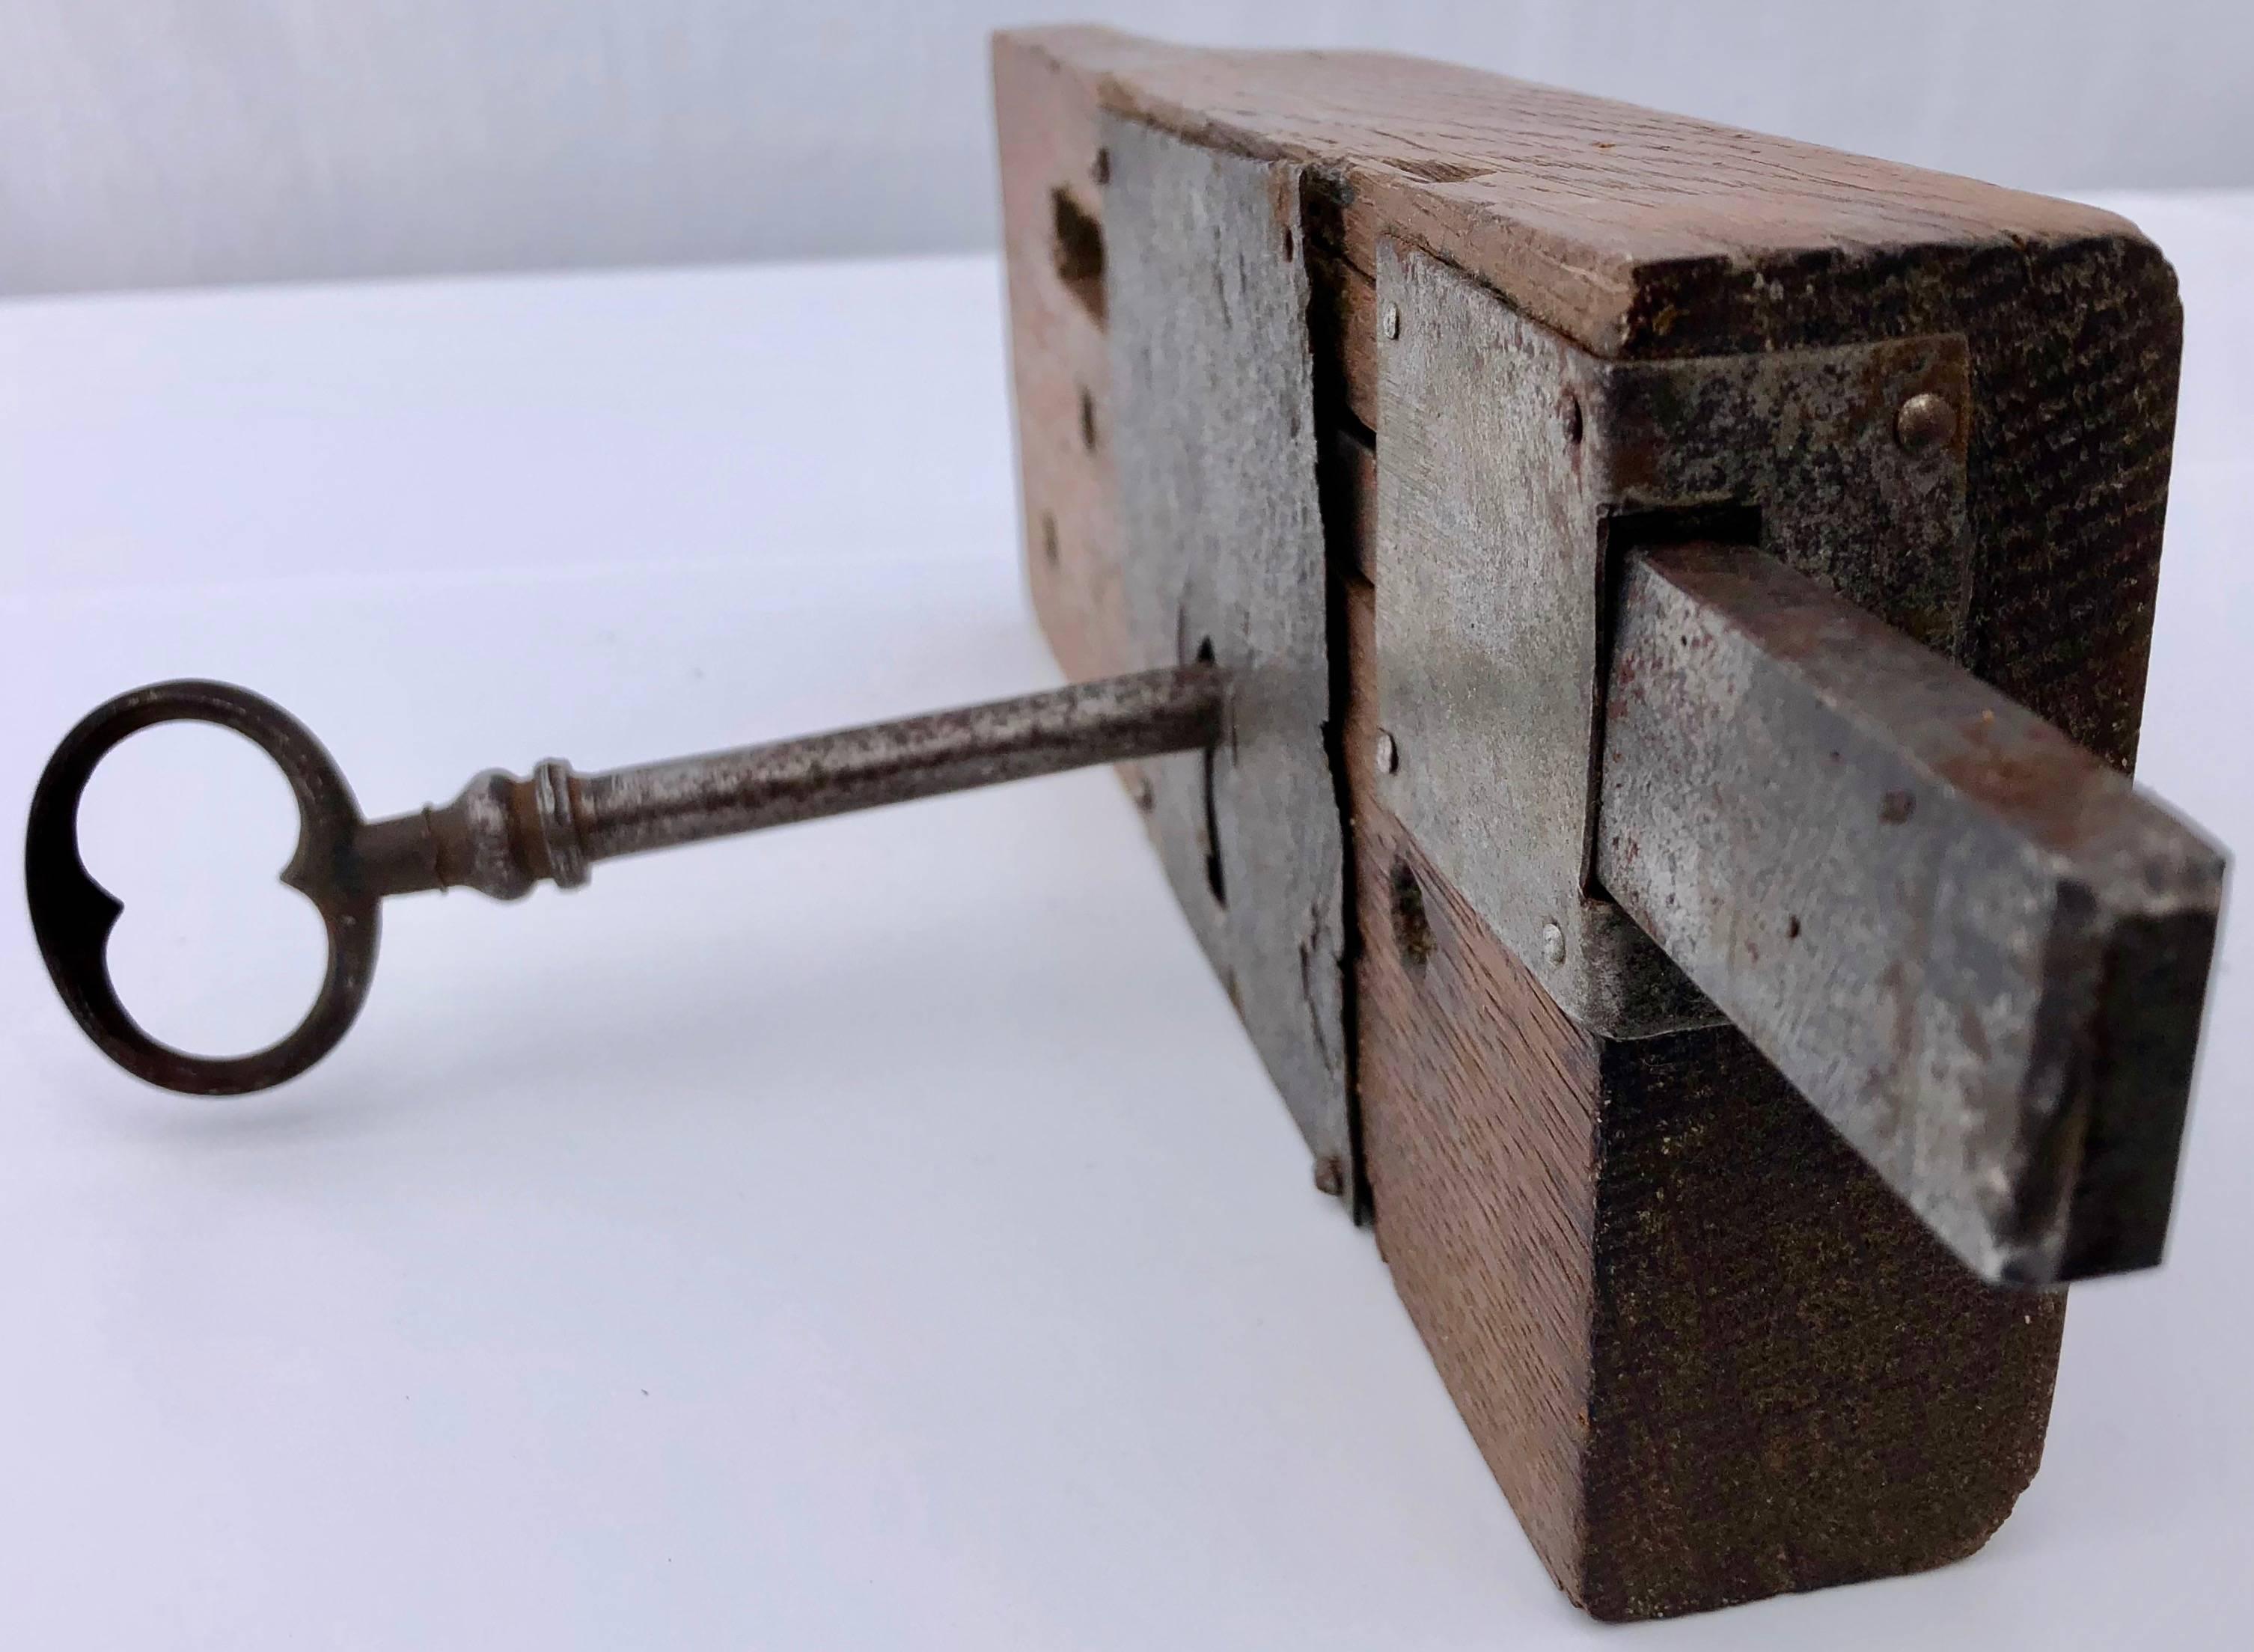 This 18th-19th century French hand-wrought iron mortise mount lock has a deadbolt that operates from both sides with its own included key. It is mounted on its original wood. A unique, functioning French period lock that would add immediate charm to